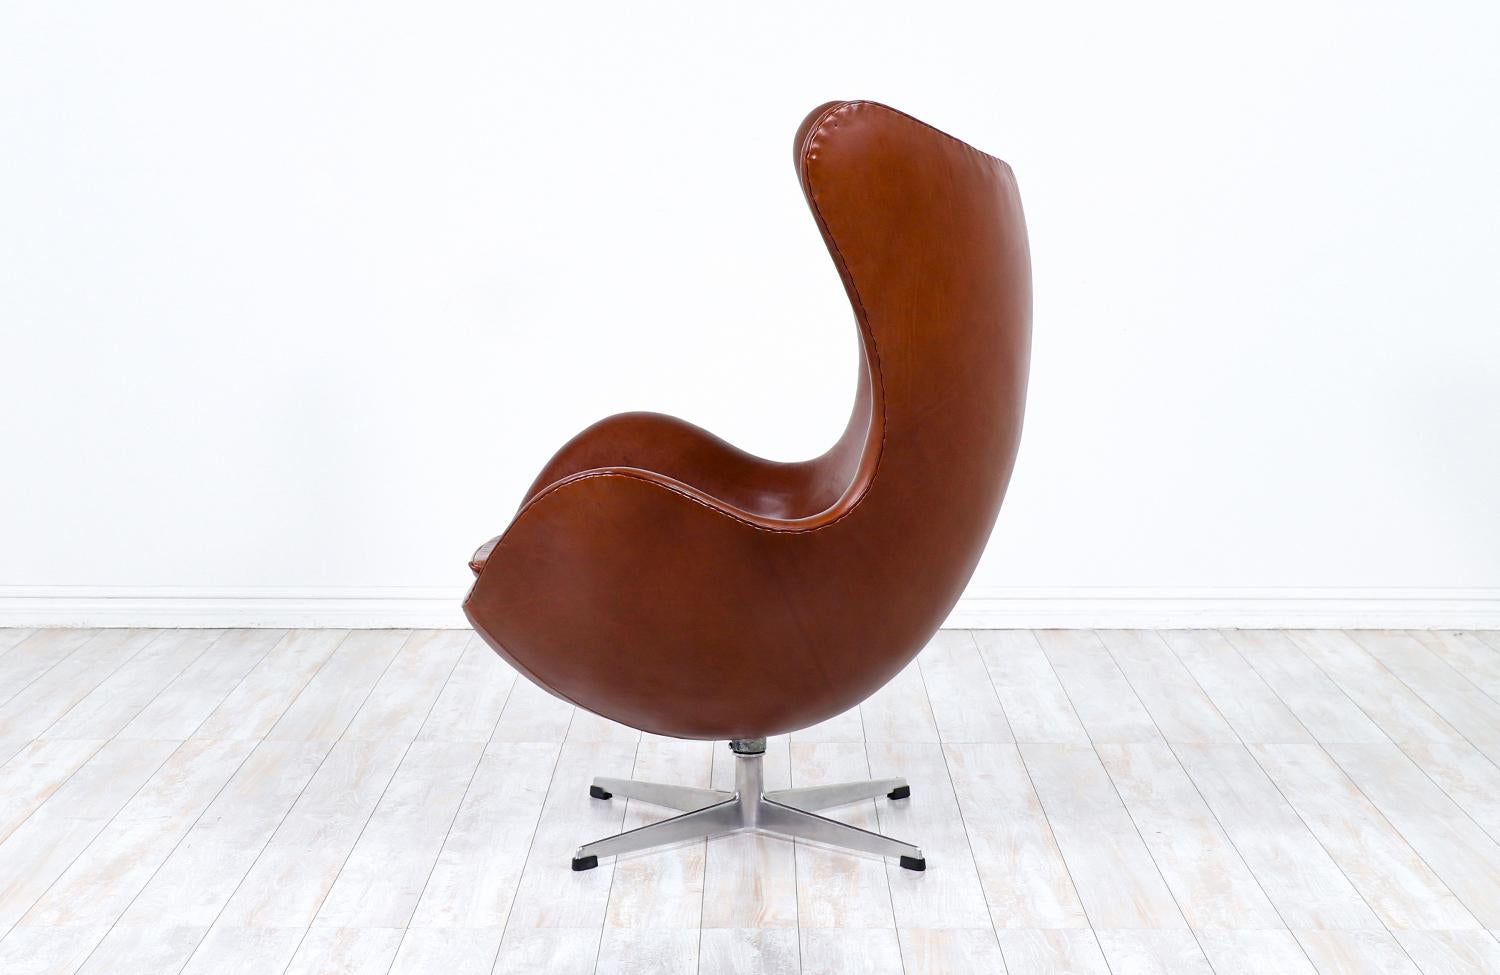 Expertly Restored - Danish Modern Cognac Leather “Egg” Chair by Arne Jacobsen In Excellent Condition For Sale In Los Angeles, CA